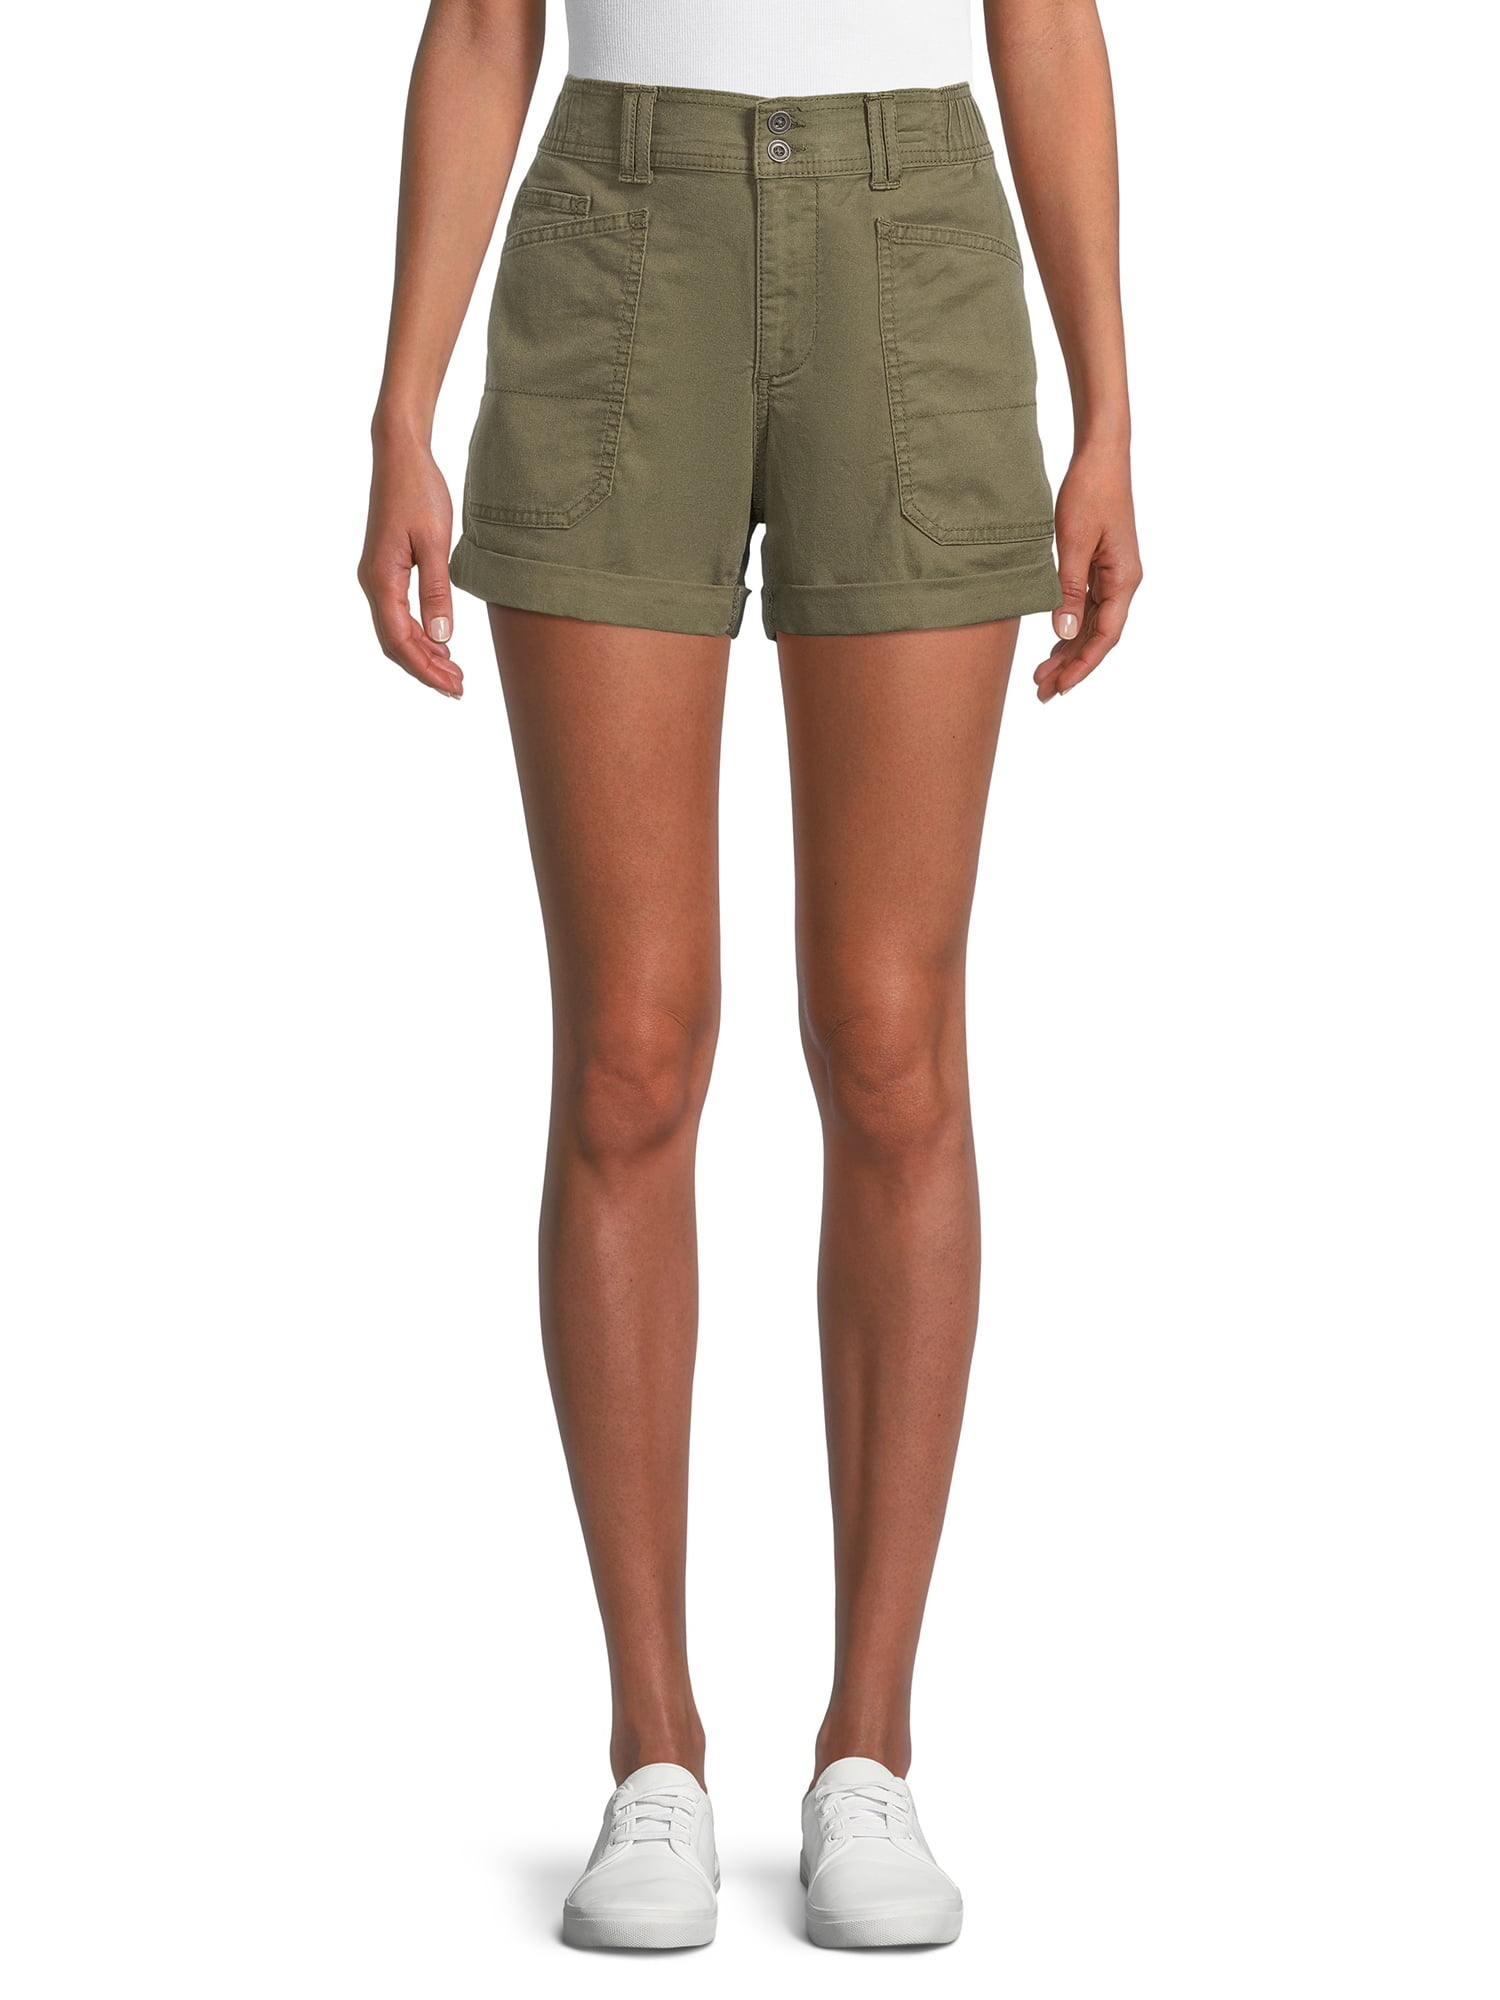 Shop Time and Tru Women's Roll Cuff Utility Shorts - Great Prices Await ...